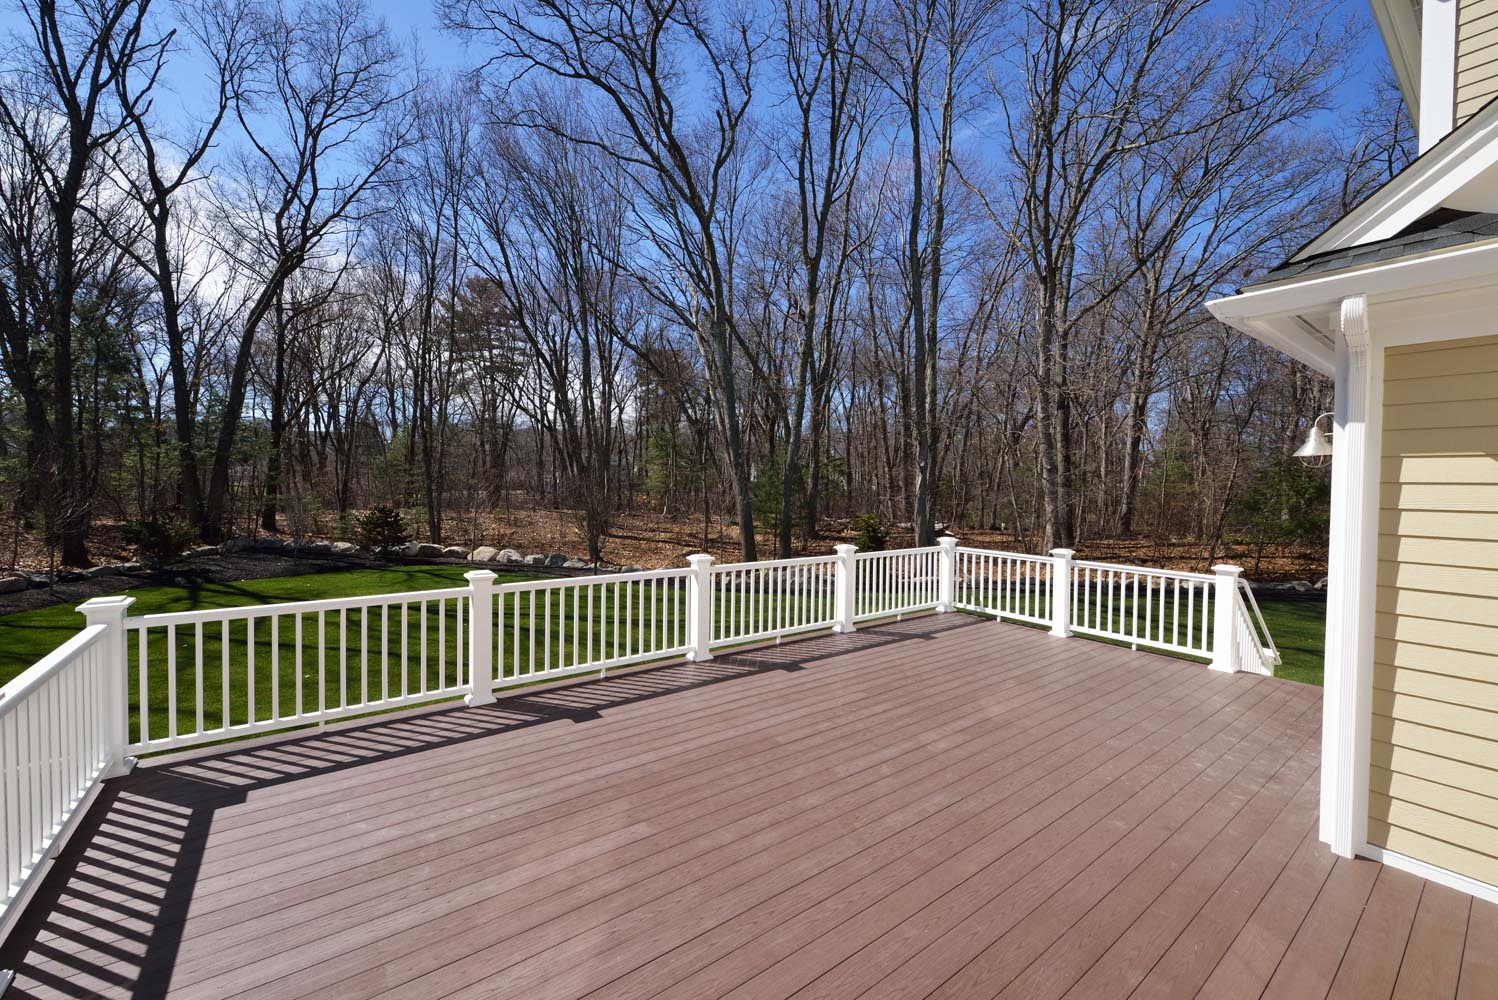 New backyard deck. White vinyl railings and composite brown boards. Large patio and garden space with a view to the woods.